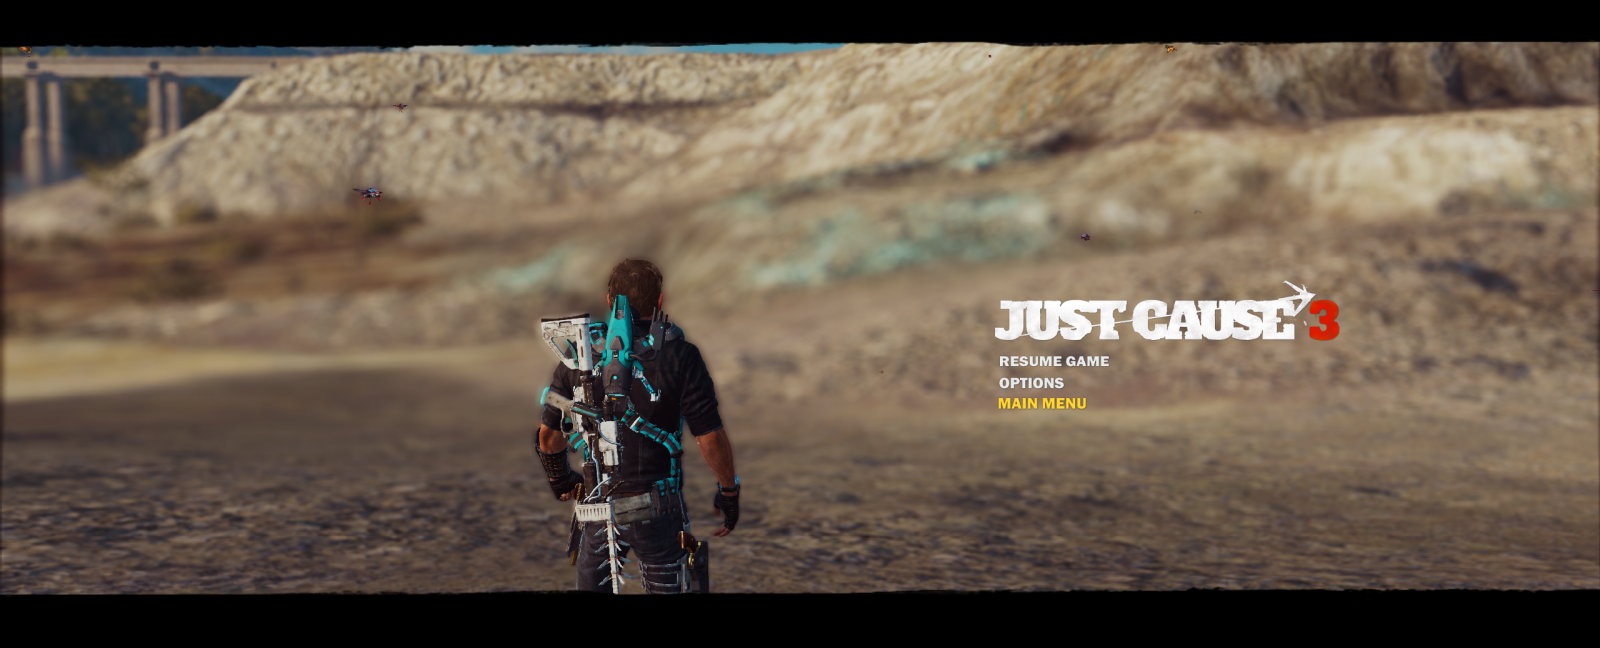 Just Cause 2 Rico Outfit (clothes remodelled to just cause 2 rico)